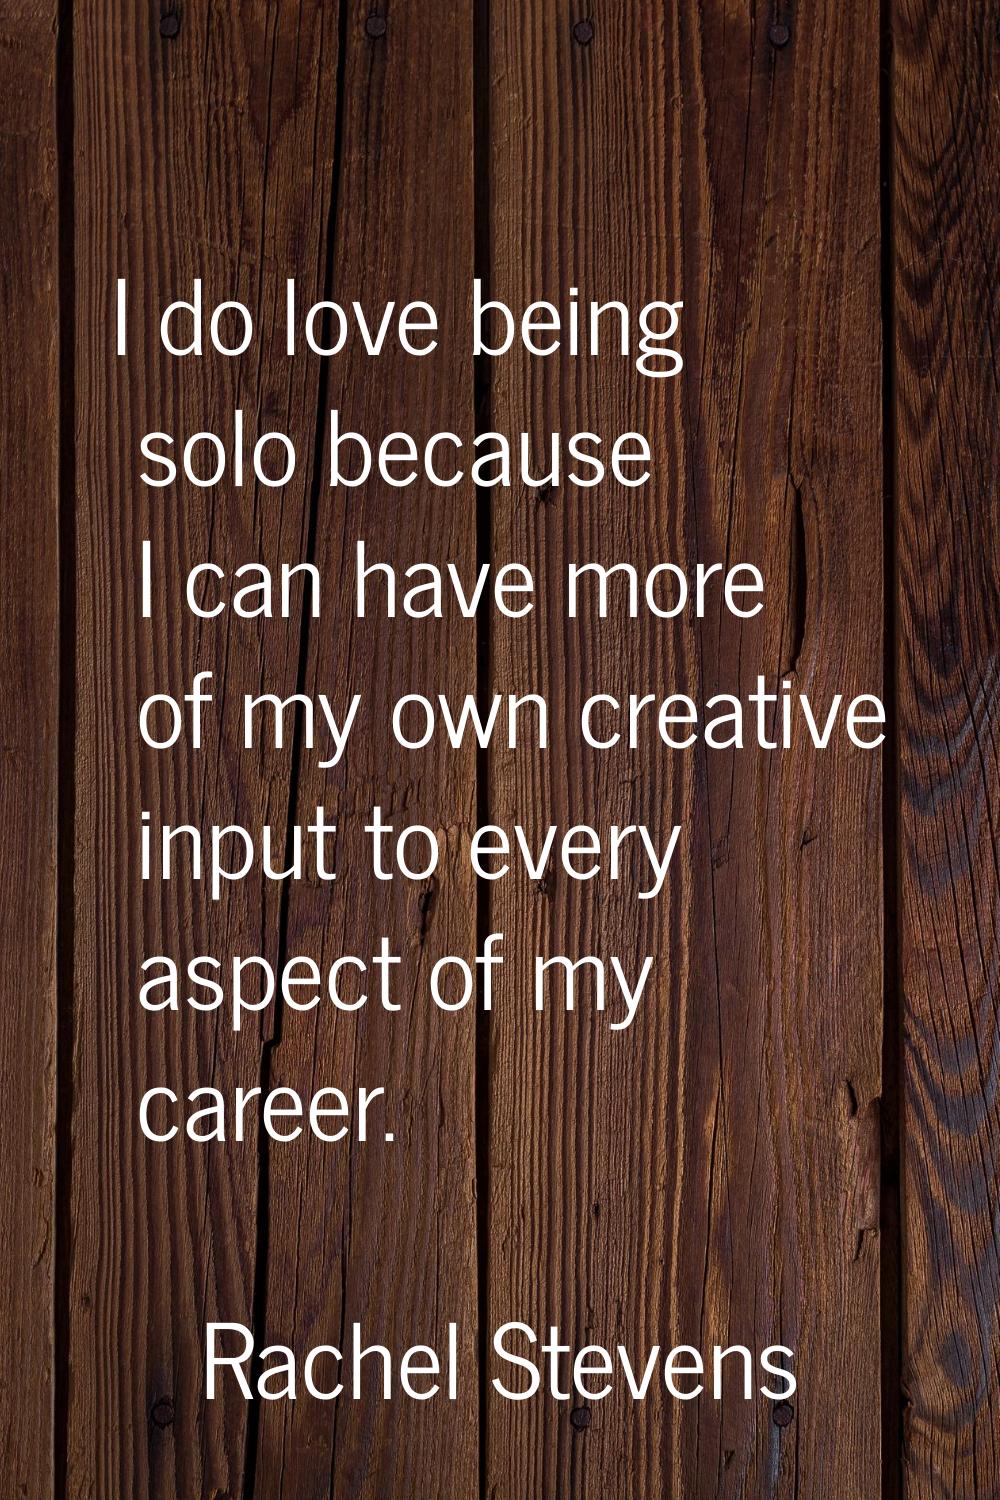 I do love being solo because I can have more of my own creative input to every aspect of my career.